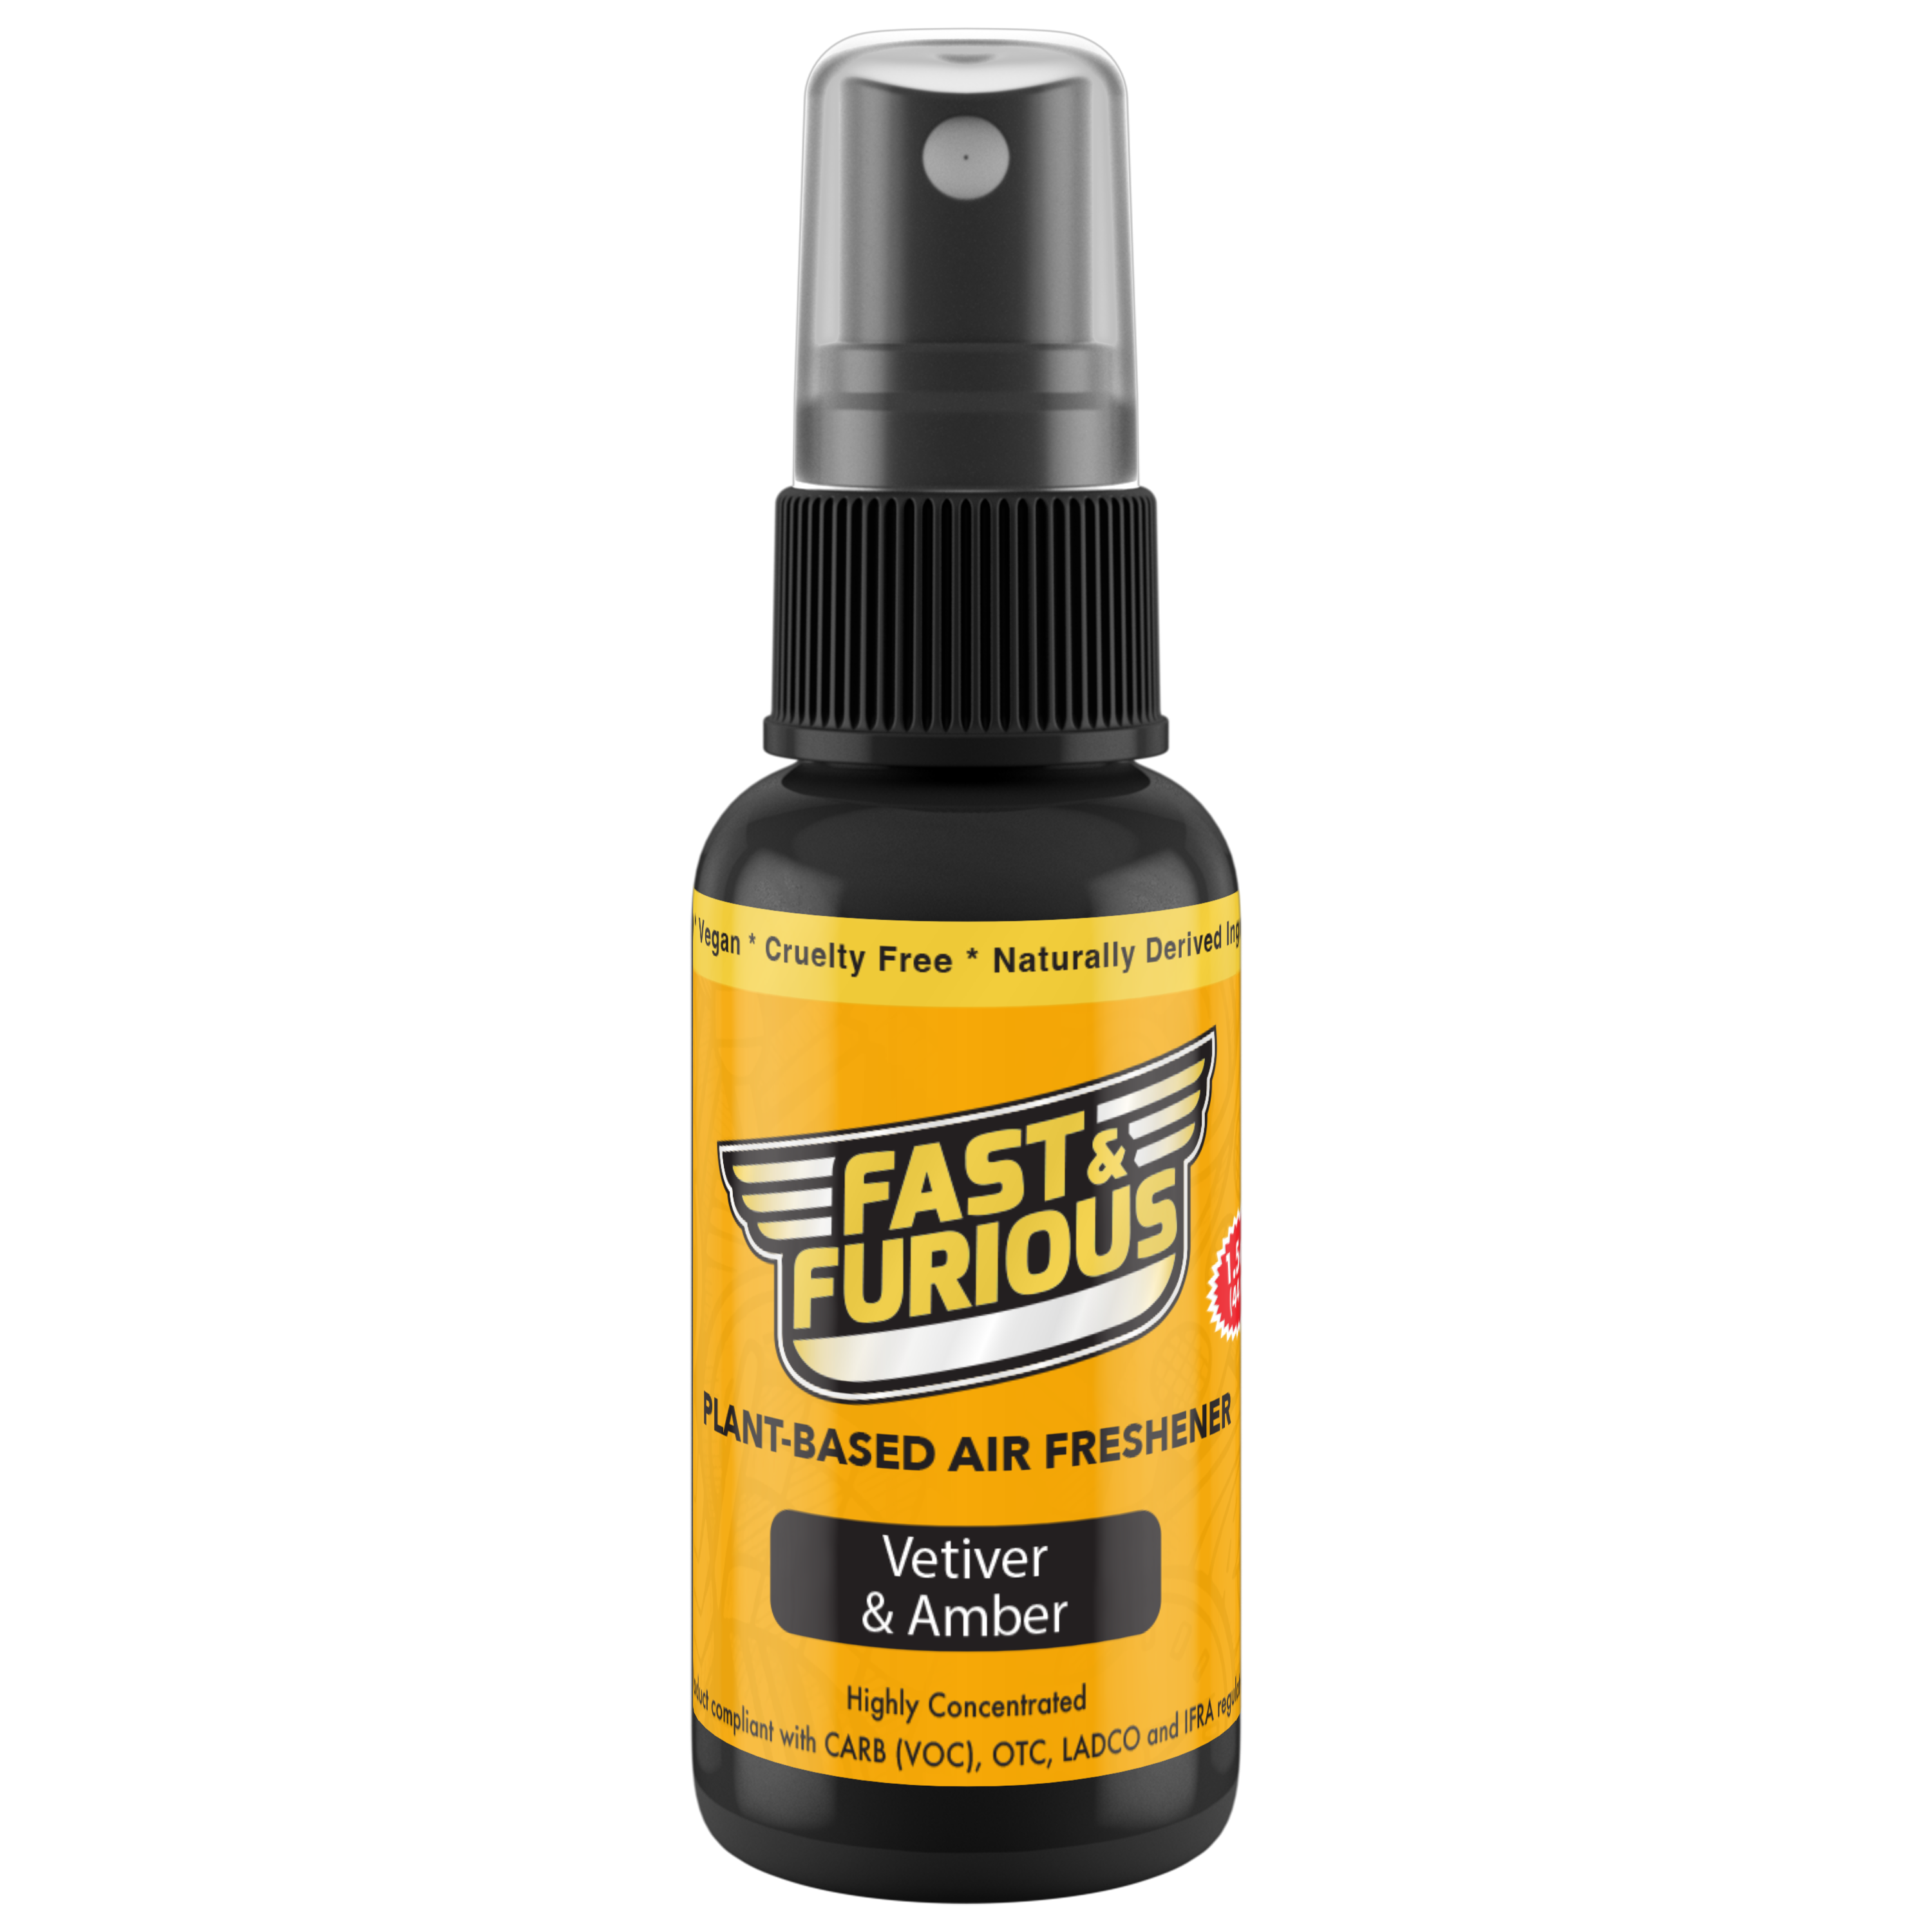 Fast and Furious Plant-Based Air Freshener - Vetiver & Amber Scent